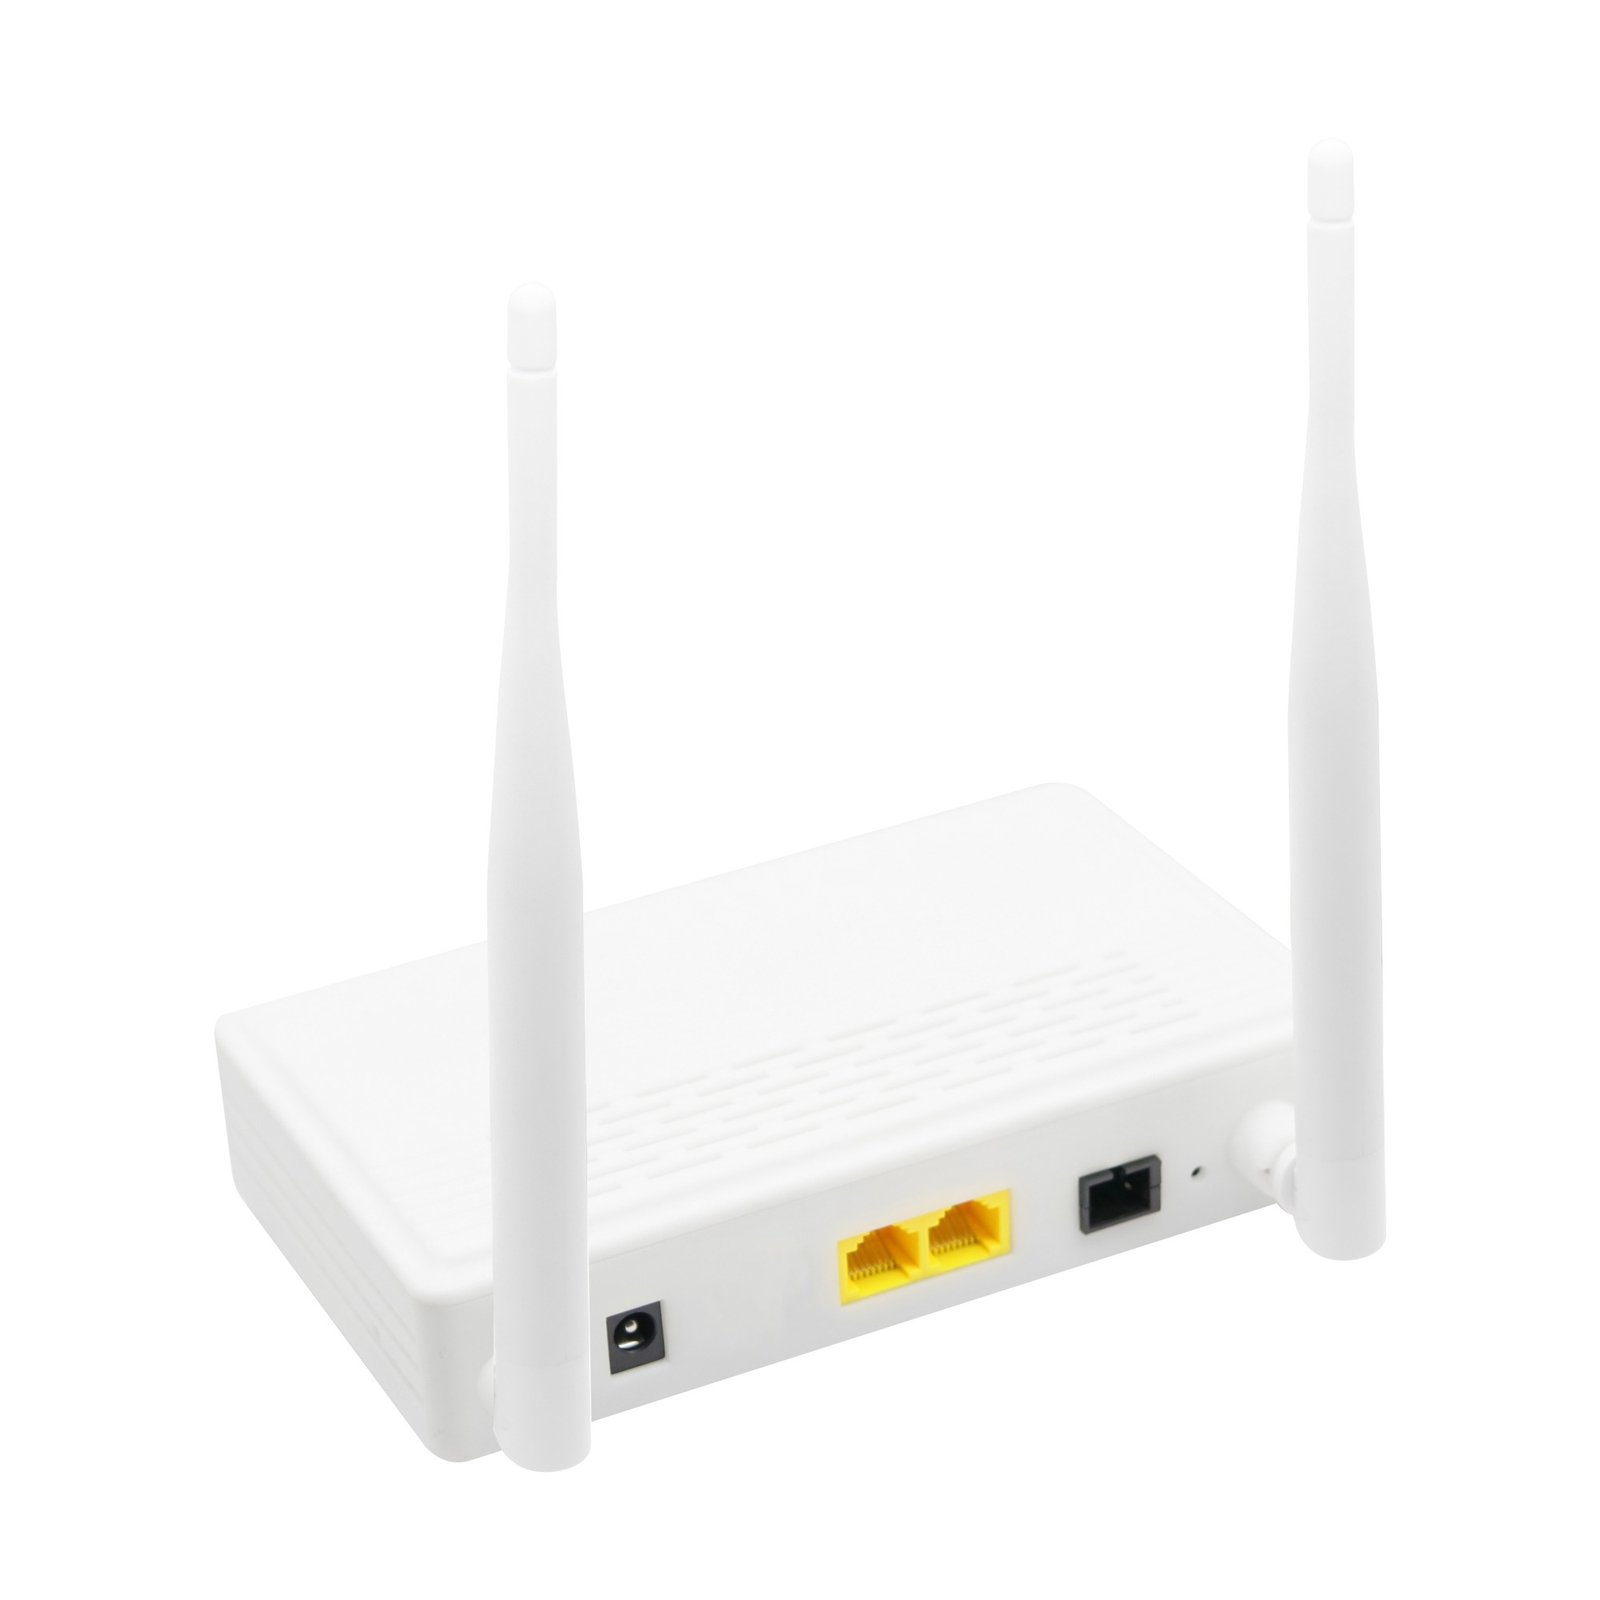 Hot Selling for Router Repeater - QF-HE101W EPON ONU 1GE+1FE WIFI  EPON ONT – Qualfiber